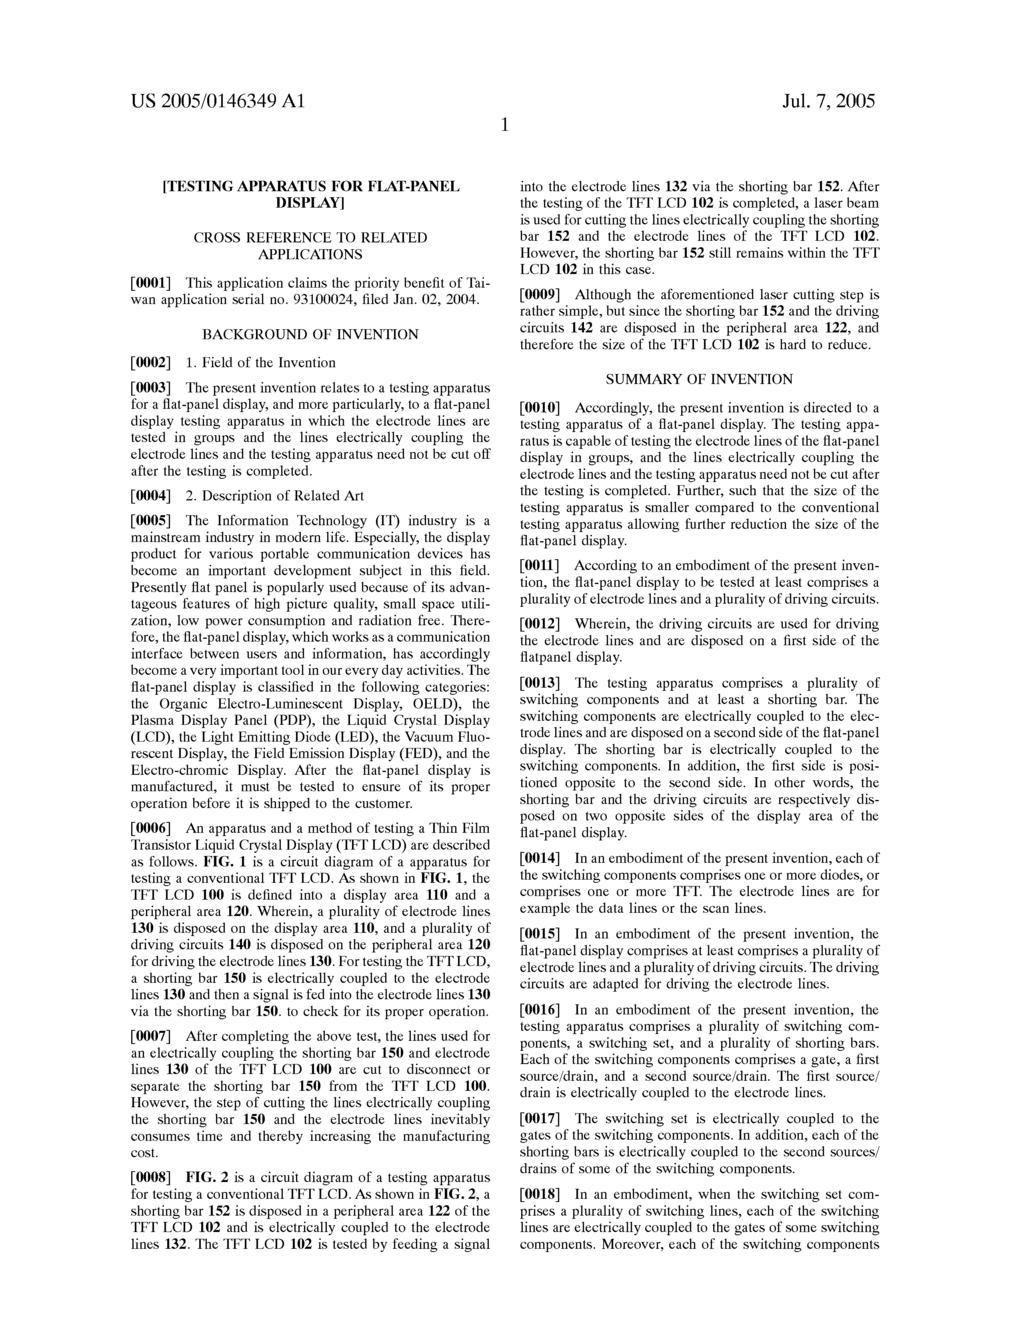 US 2005/0146349 A1 Jul. 7, 2005 TESTINGAPPARATUS FOR FLAT-PANEL DISPLAY CROSS REFERENCE TO RELATED APPLICATIONS 0001. This application claims the priority benefit of Tai wan application serial no.